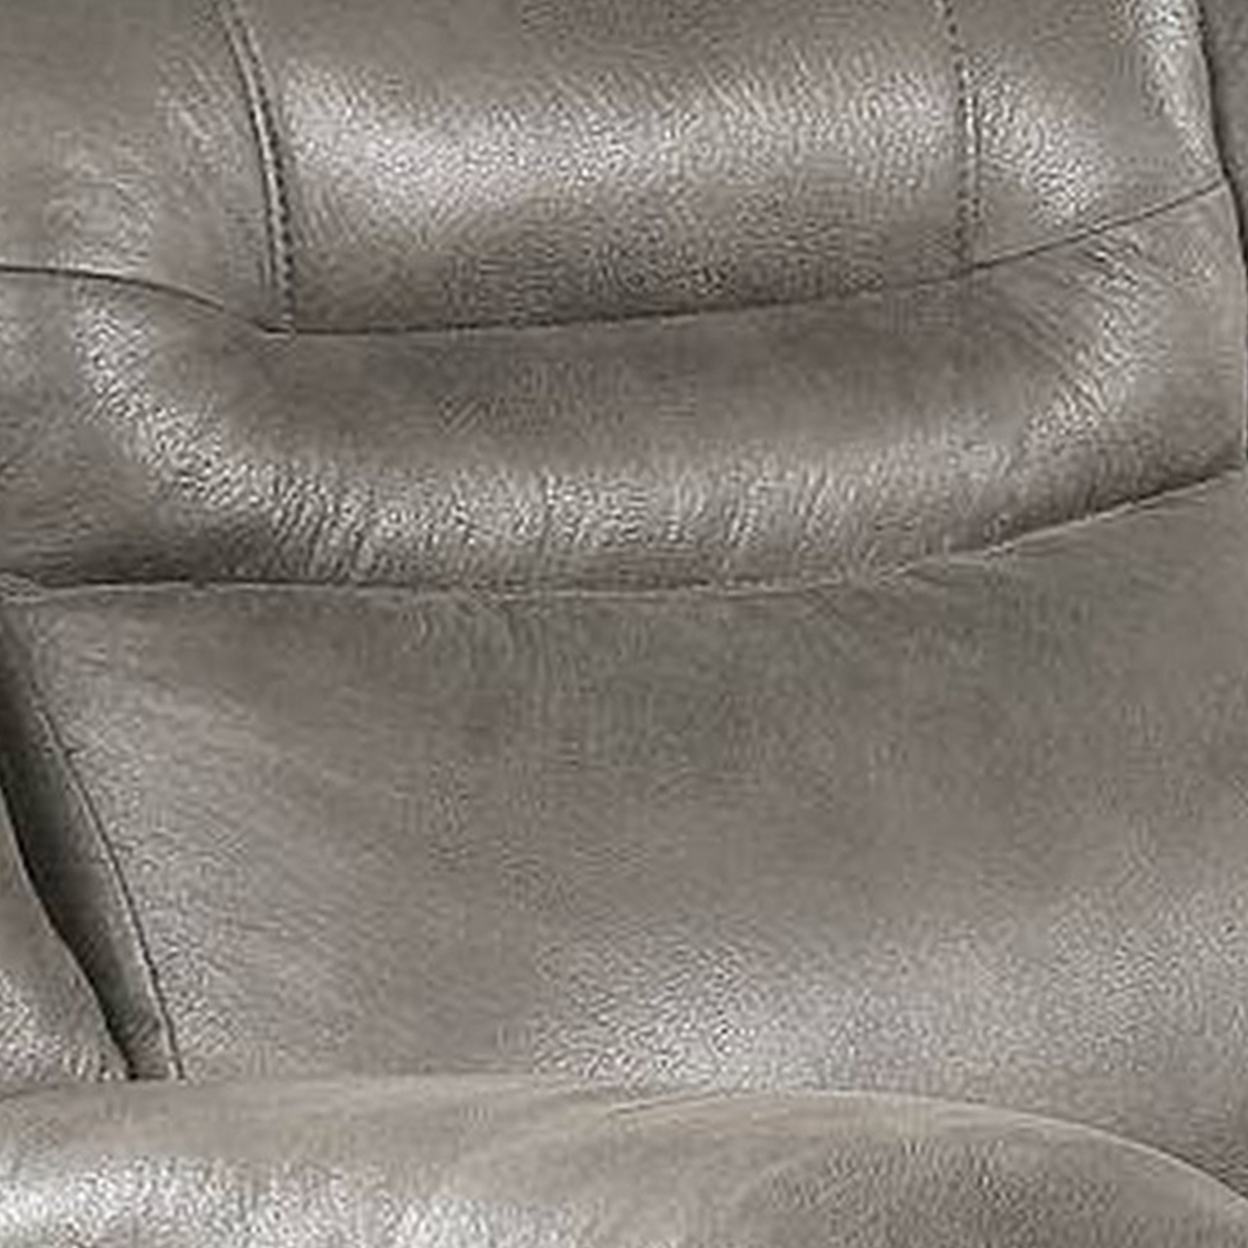 Betty 41 Inch Power Recliner Chair, Pull Tab Mechanism, Smooth Gray Leather